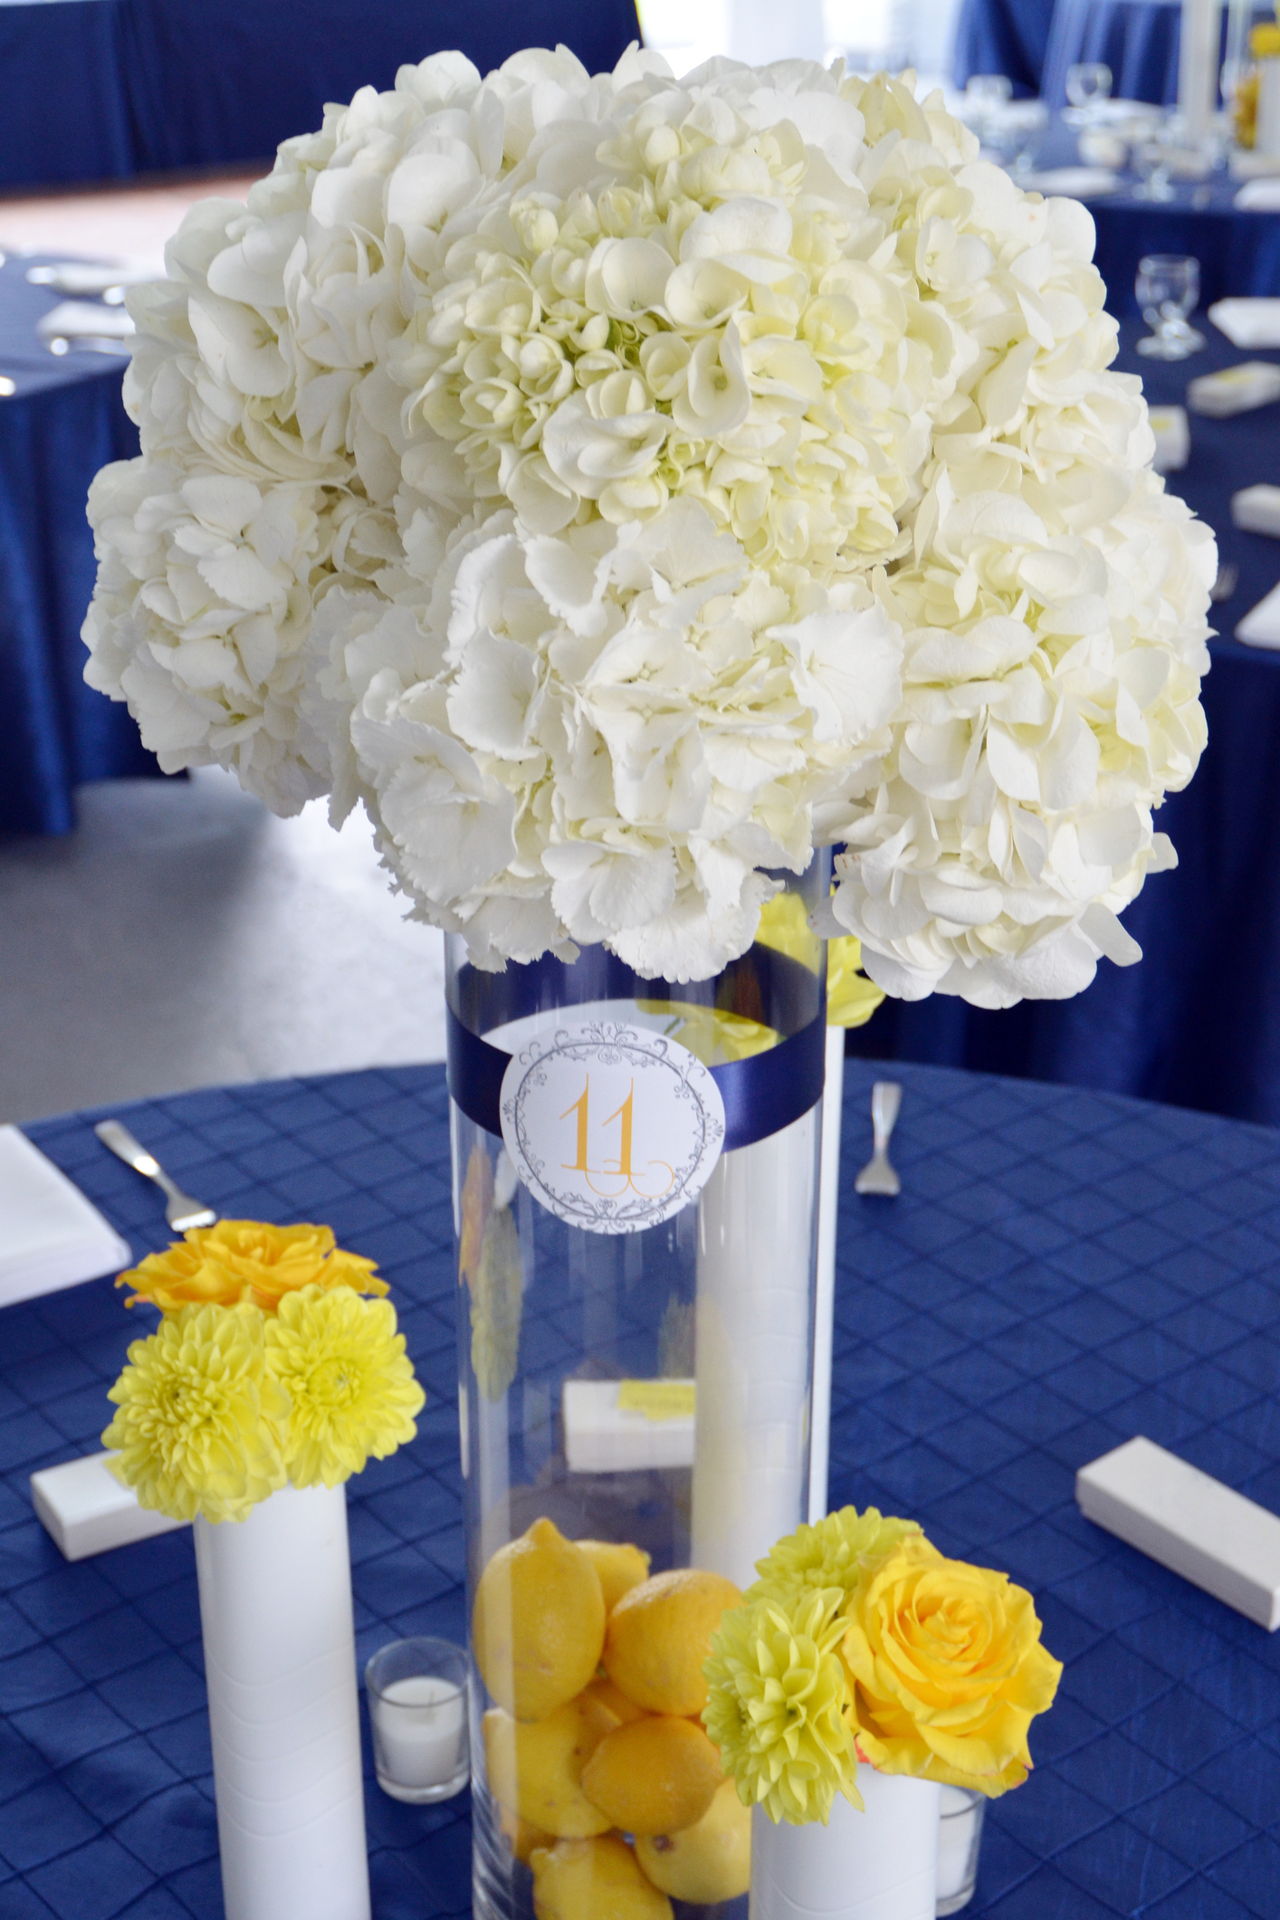 Eye-catching Centerpieces to Enhance the Retirement Party Decor